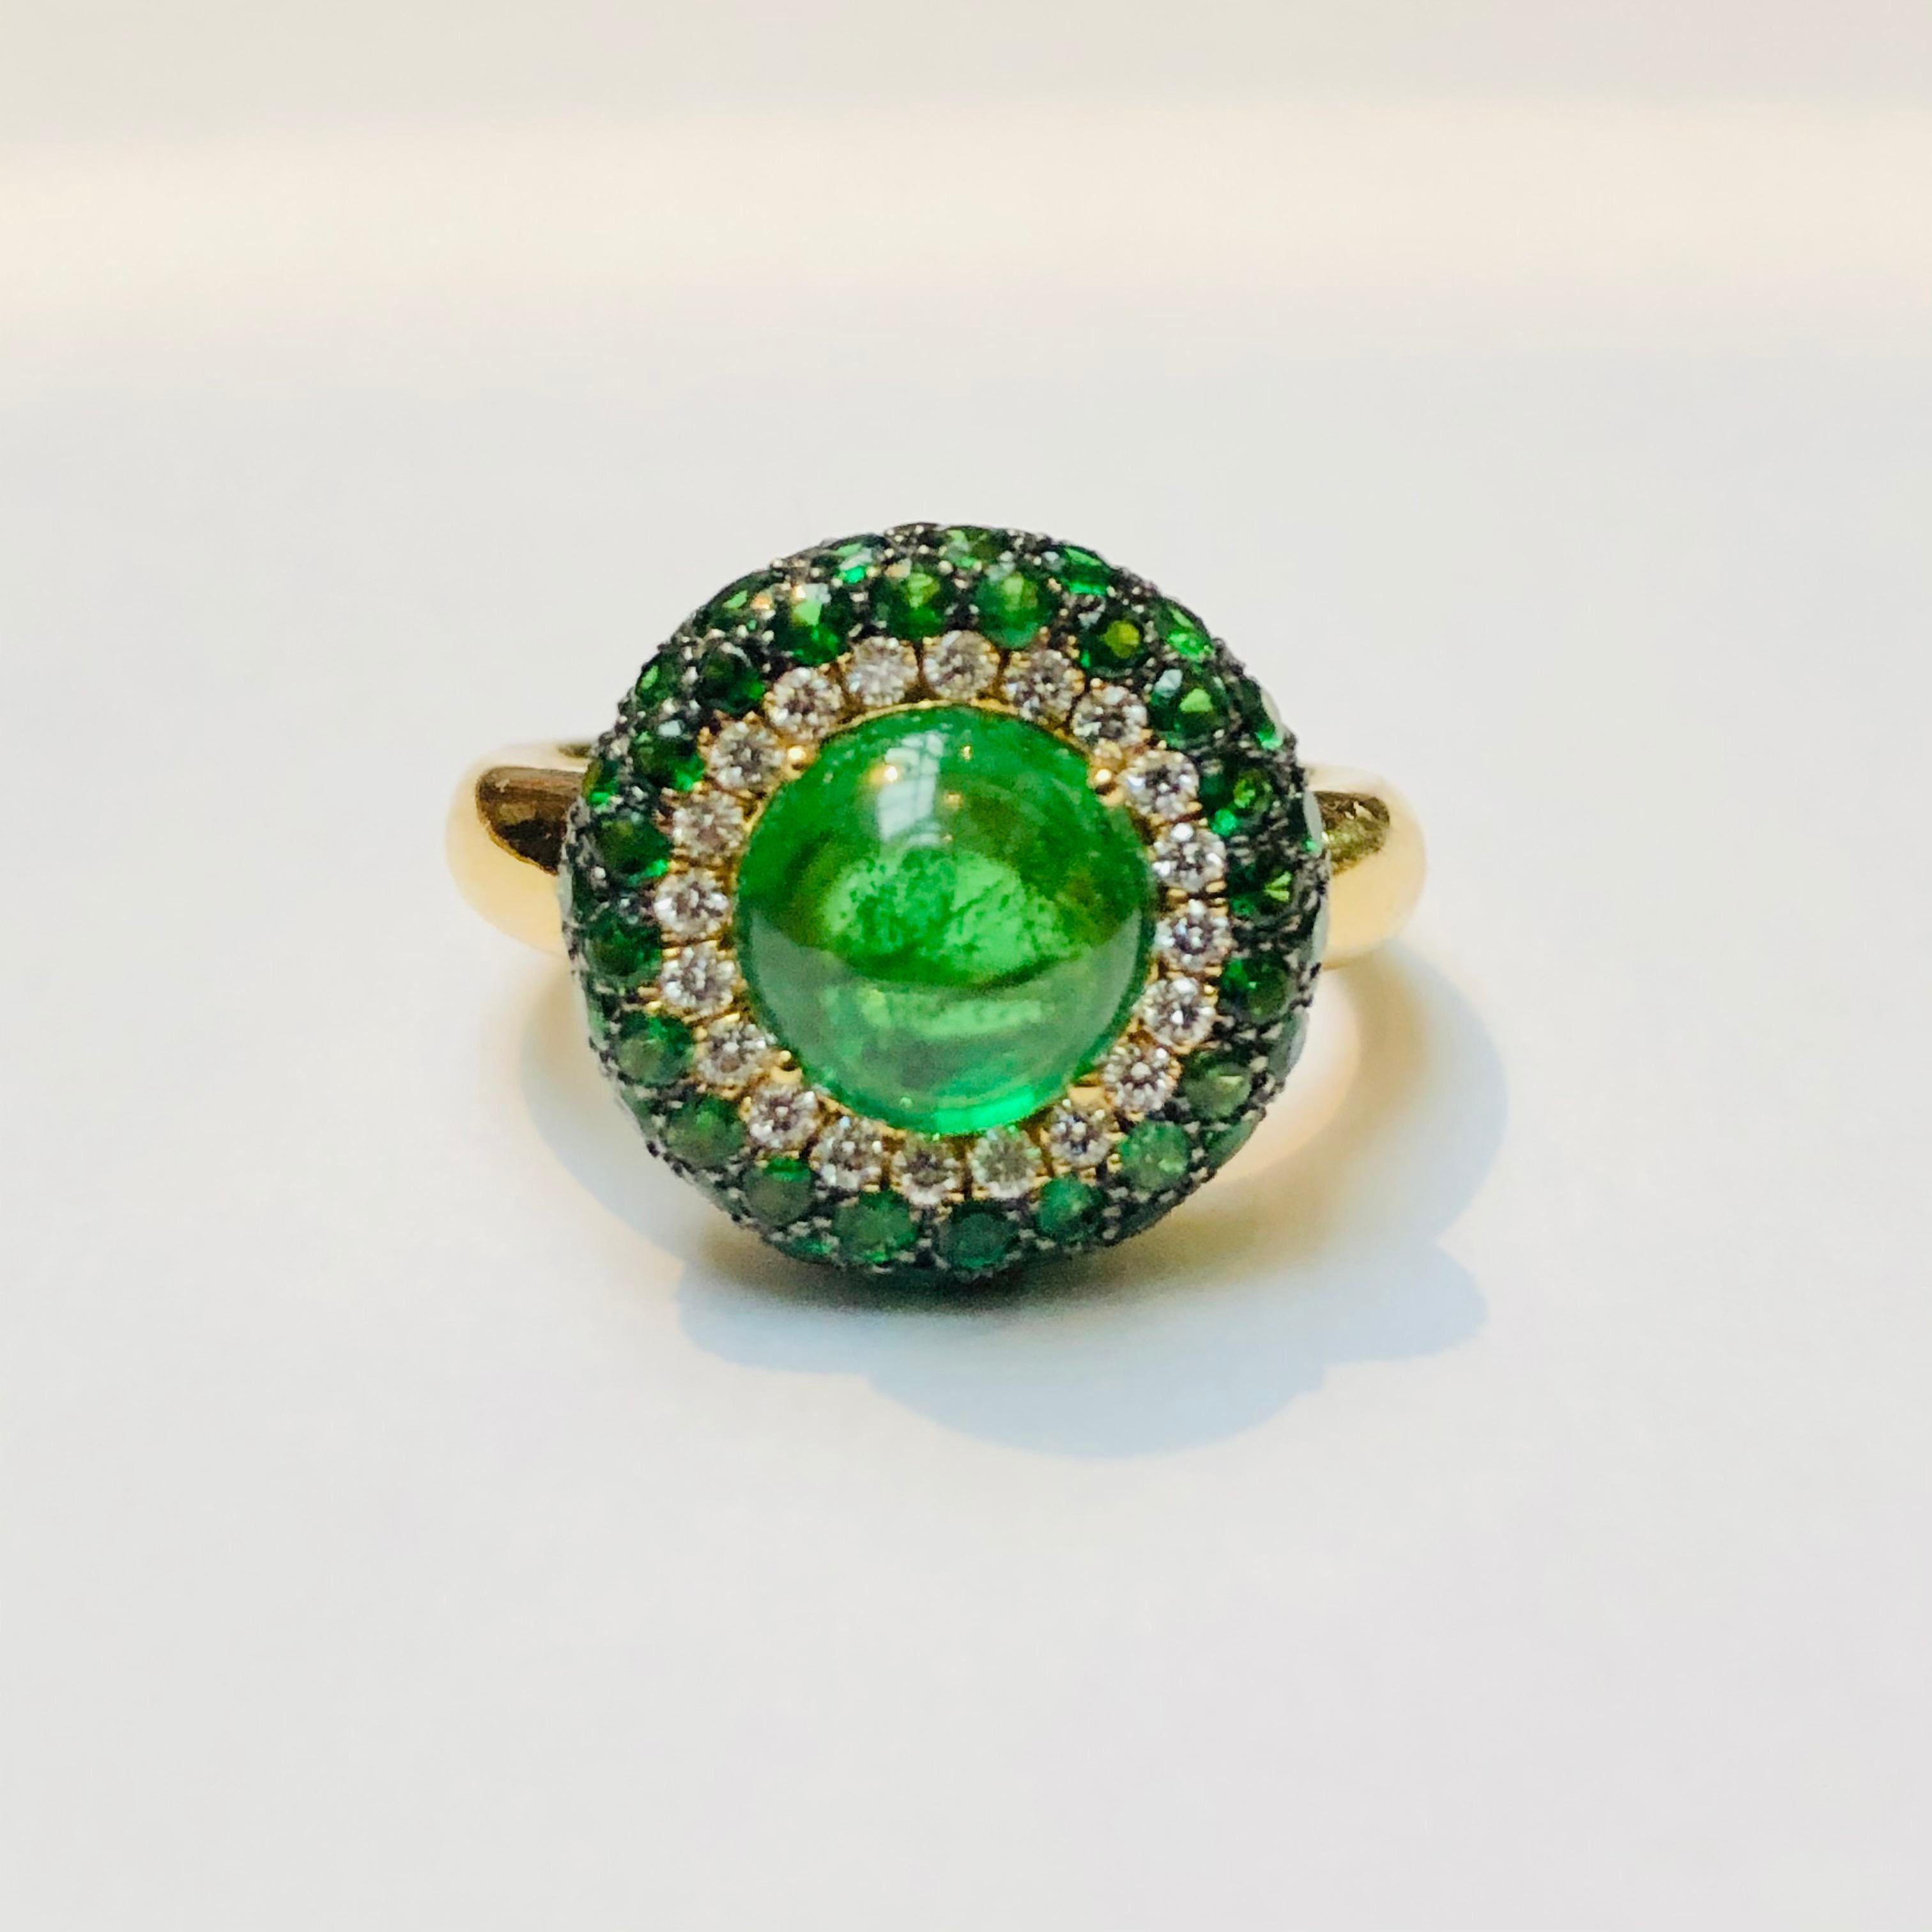 Tsavorite Cabochon Cocktail Ring, 18 Carat Yellow Gold, Made in Italy. Bullseye Target ring featiring a cabochon tsavorite surrounded by pave tsavorite with a yellow gold shank. 